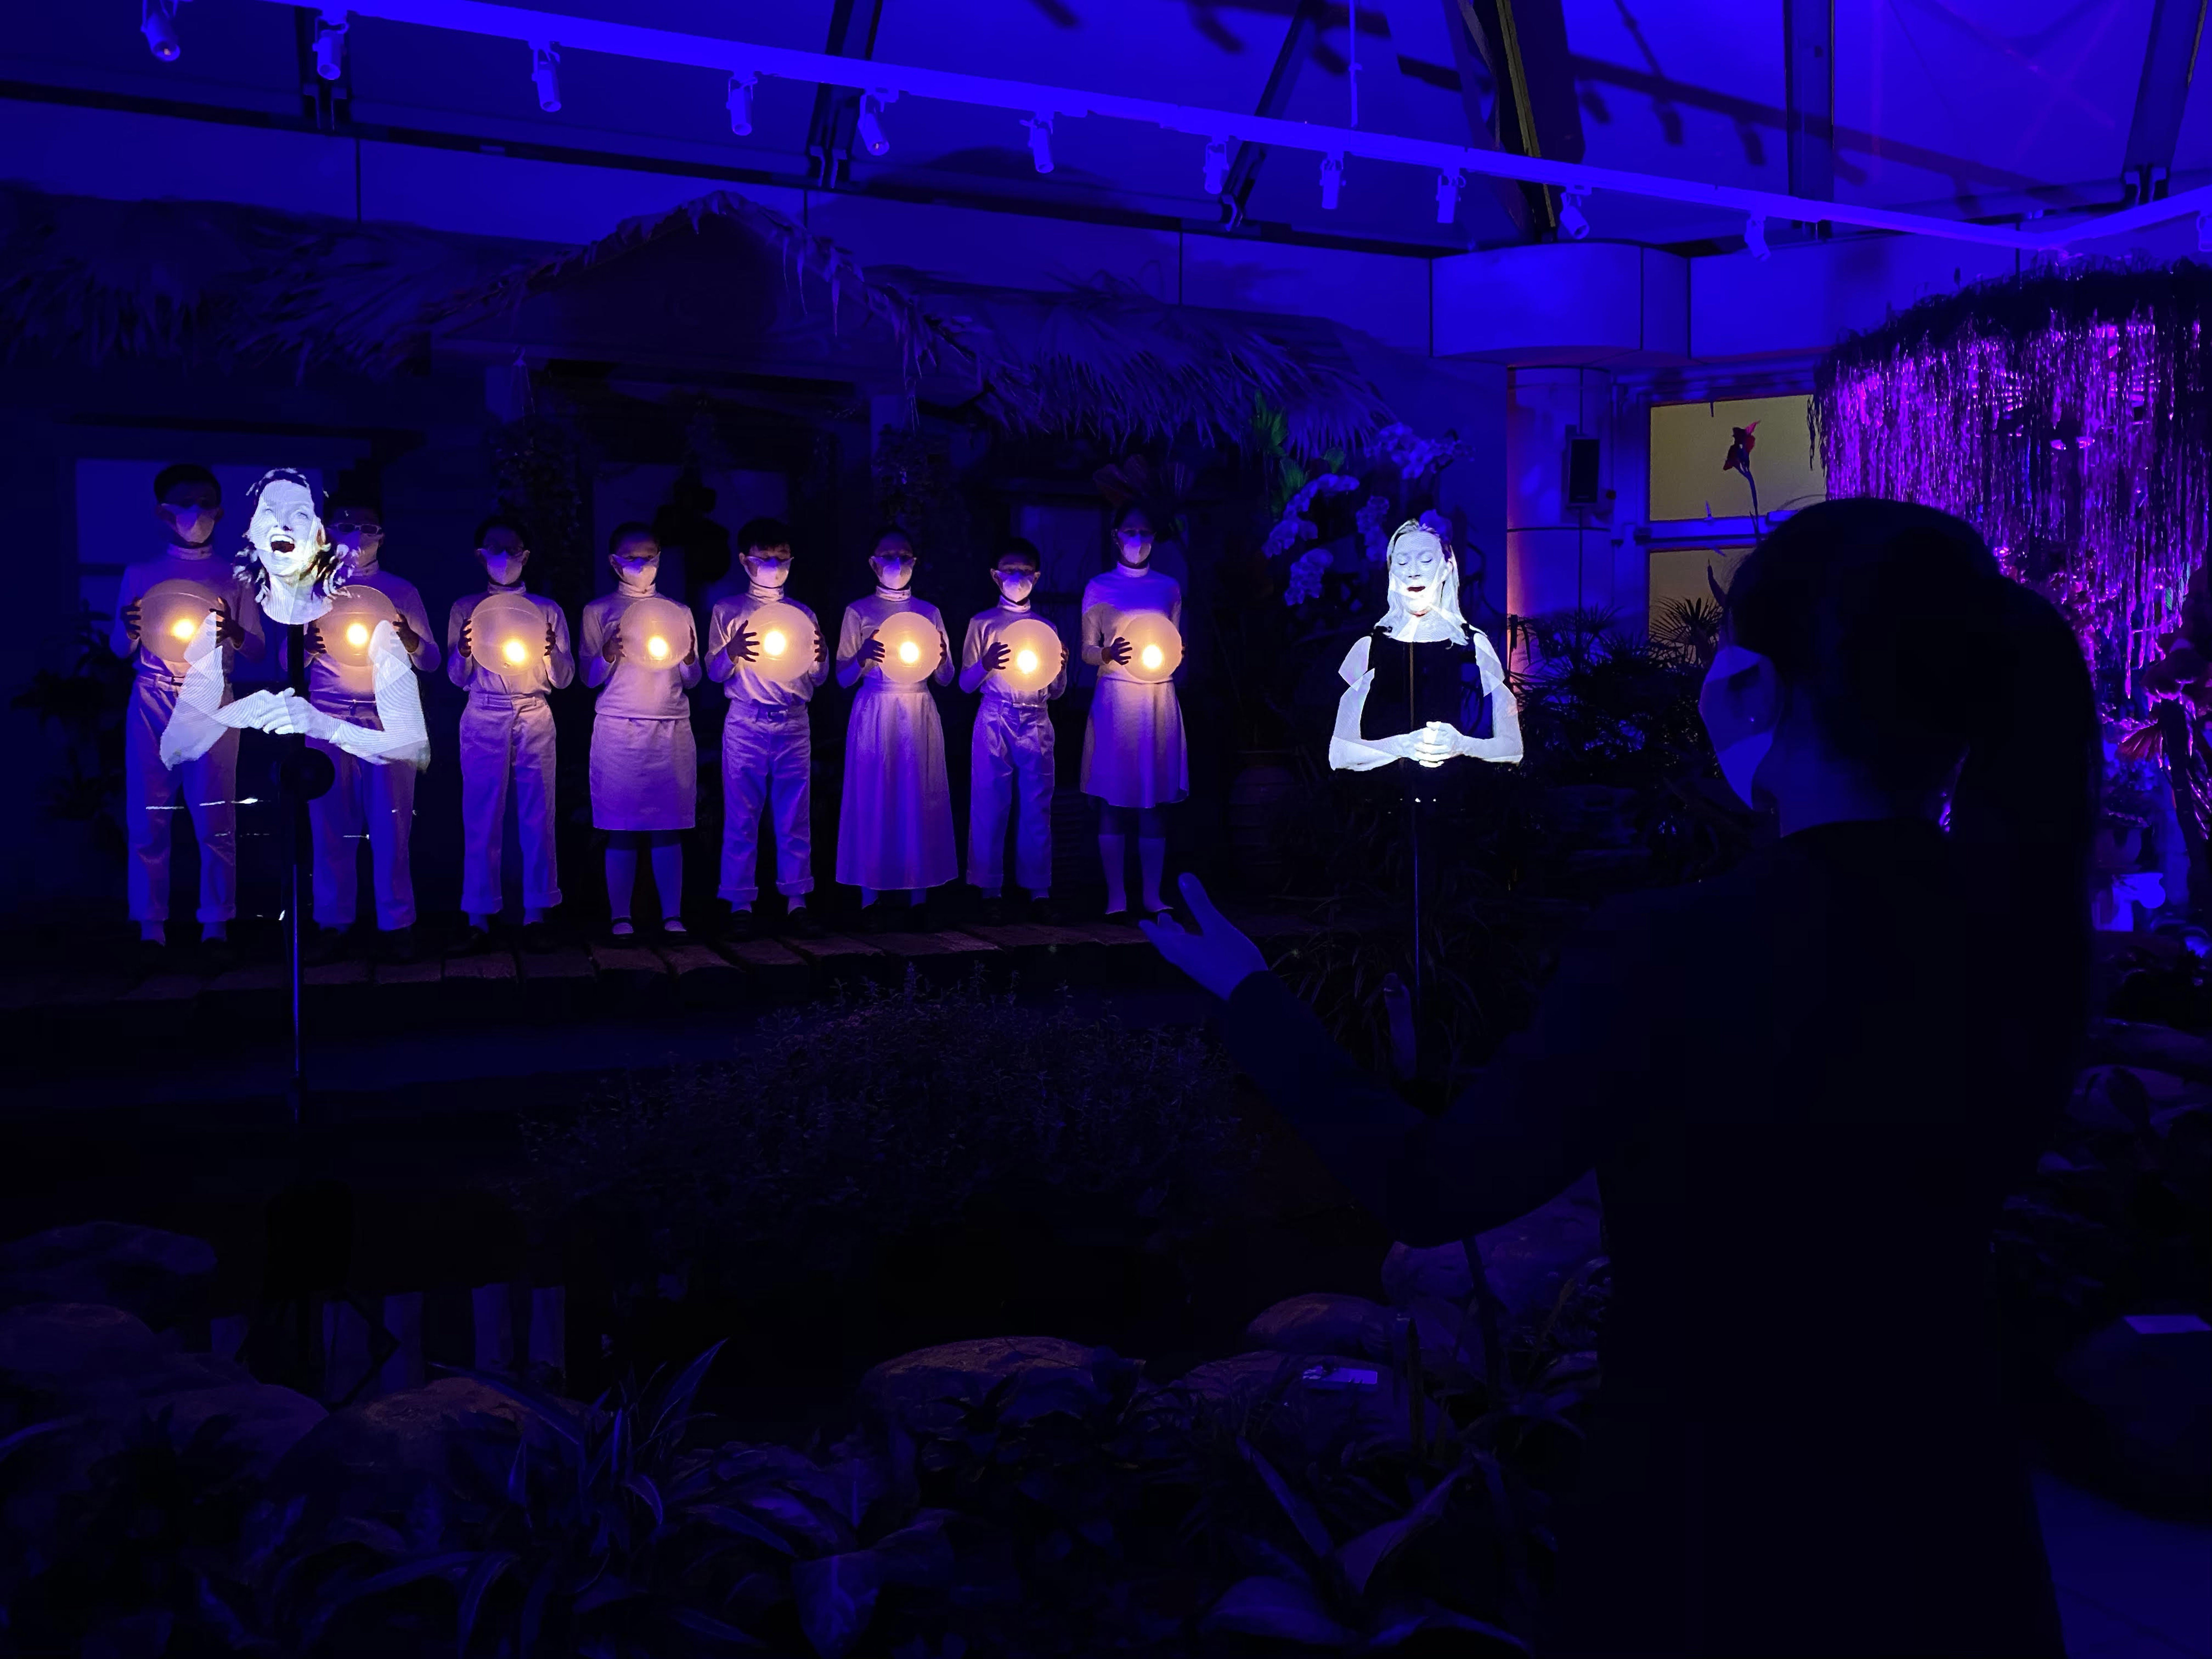 Hong Kong’s virtual reality night production, Aria, sees members of Denmark’s vocal ensemble, Theatre of Voices, appear via hologram alongside a live performance by the Hong Kong Children’s Choir.